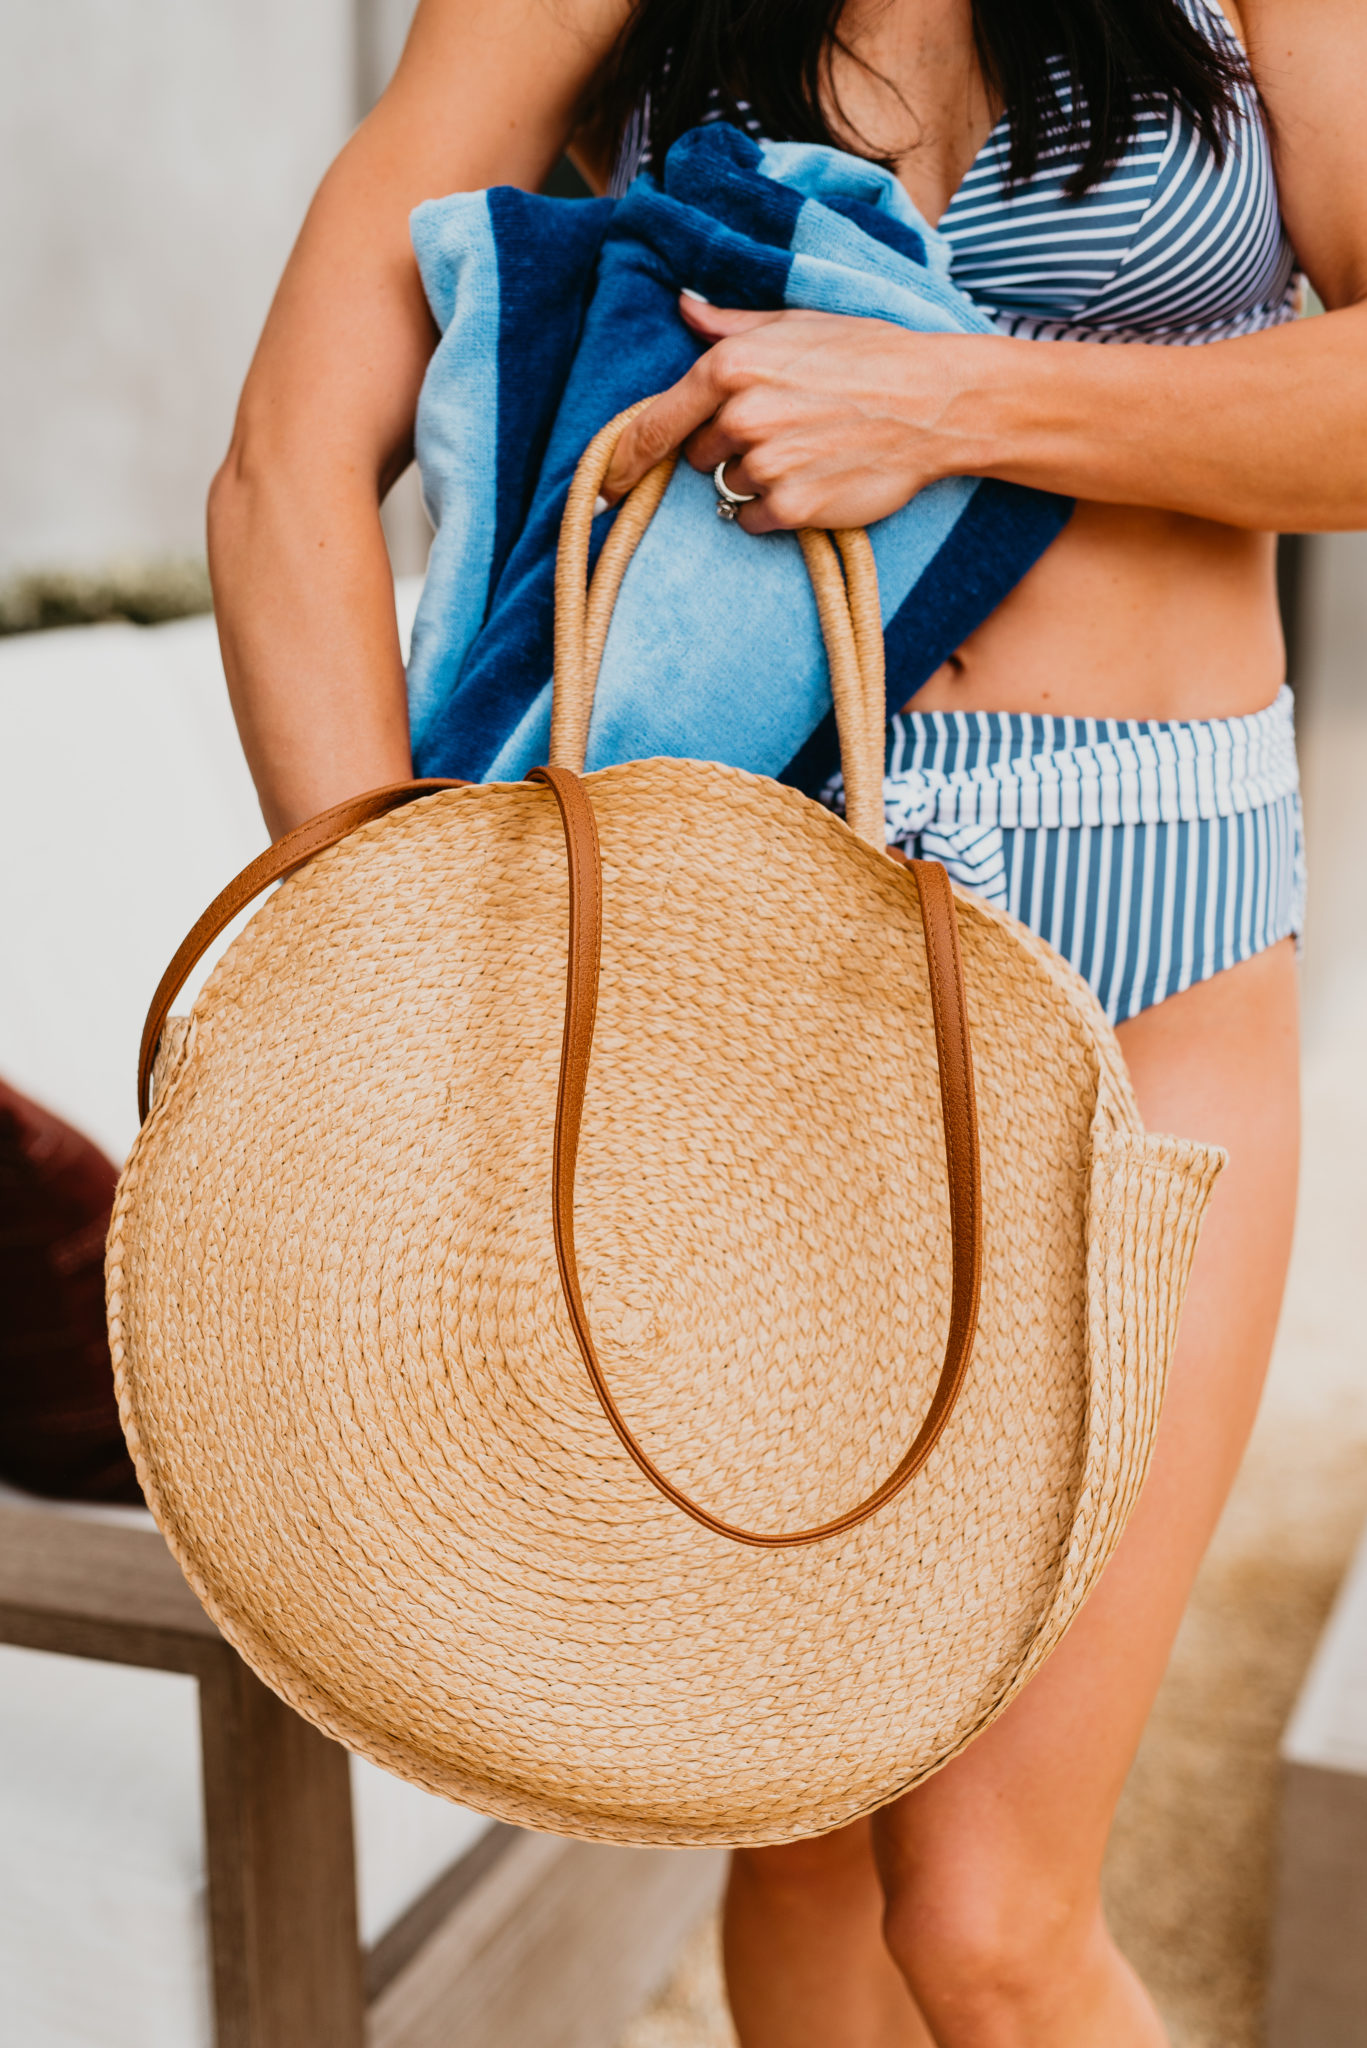 Best Brands at Walmart featured by top US fashion blog, Outfits & Outings: image of a woman wearing a Time and Tru striped bikini, Time and Tru straw circle tote, Time and Tru sandals, Time and Tru straw floppy hat, and Mainstay striped beach towel